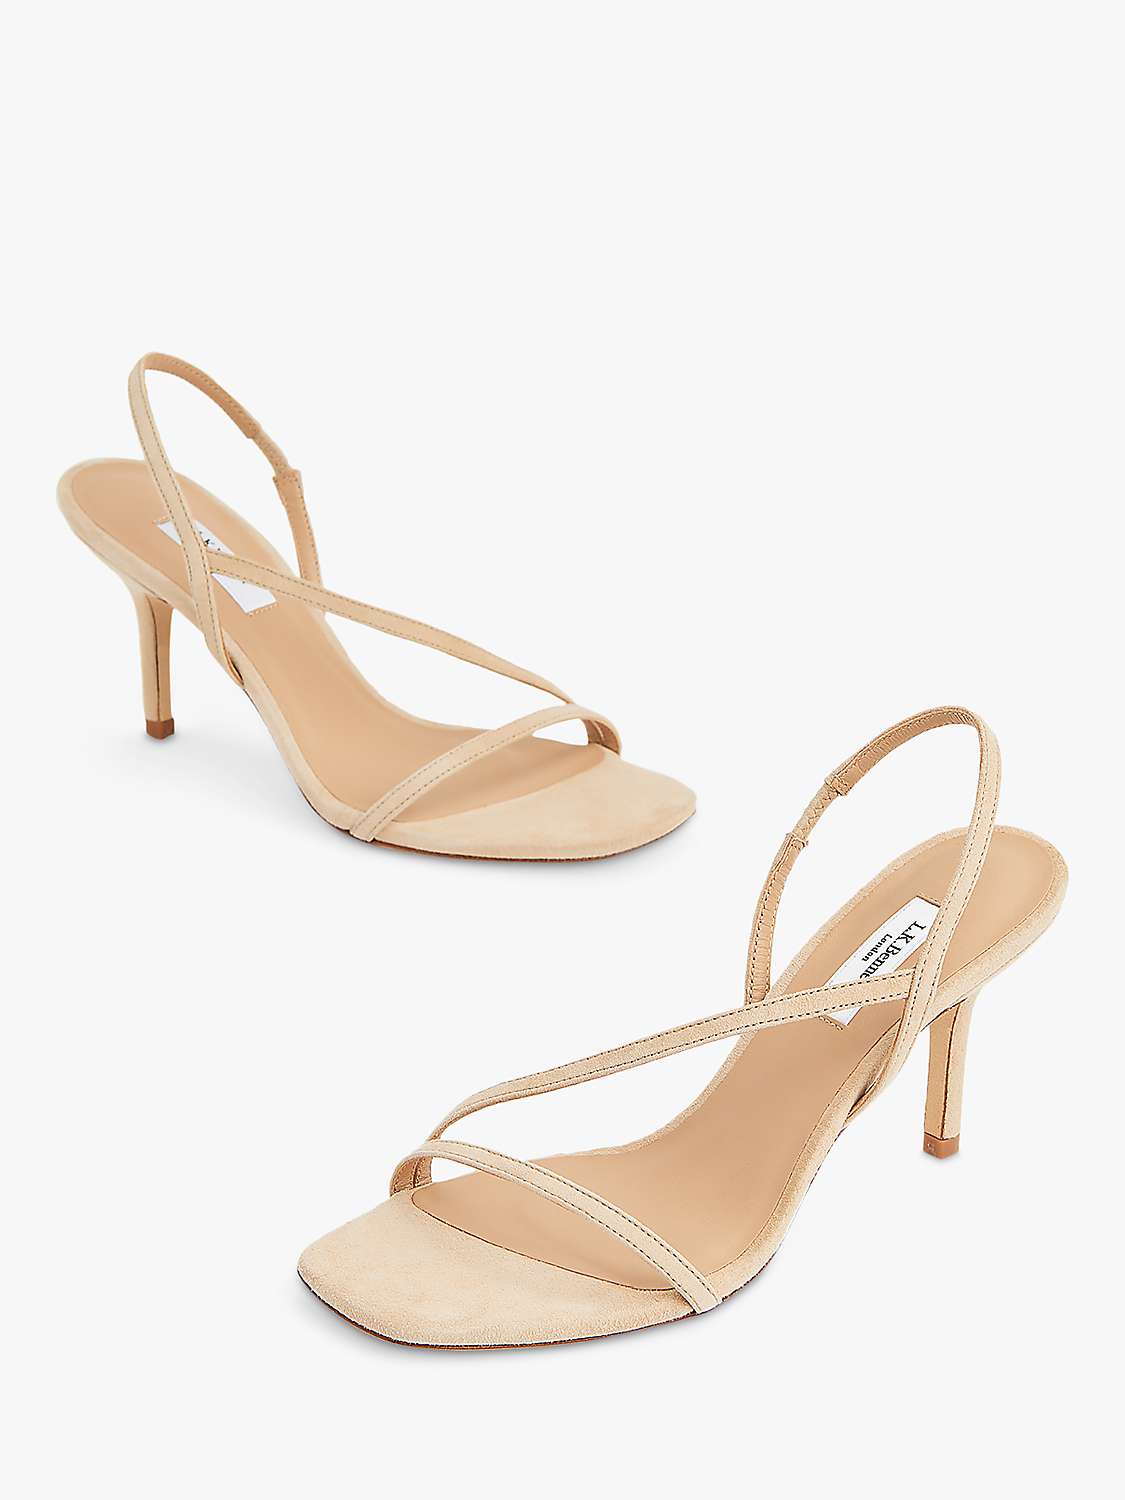 Buy L.K.Bennett Neave Suede Strappy Sandals, Trench Online at johnlewis.com